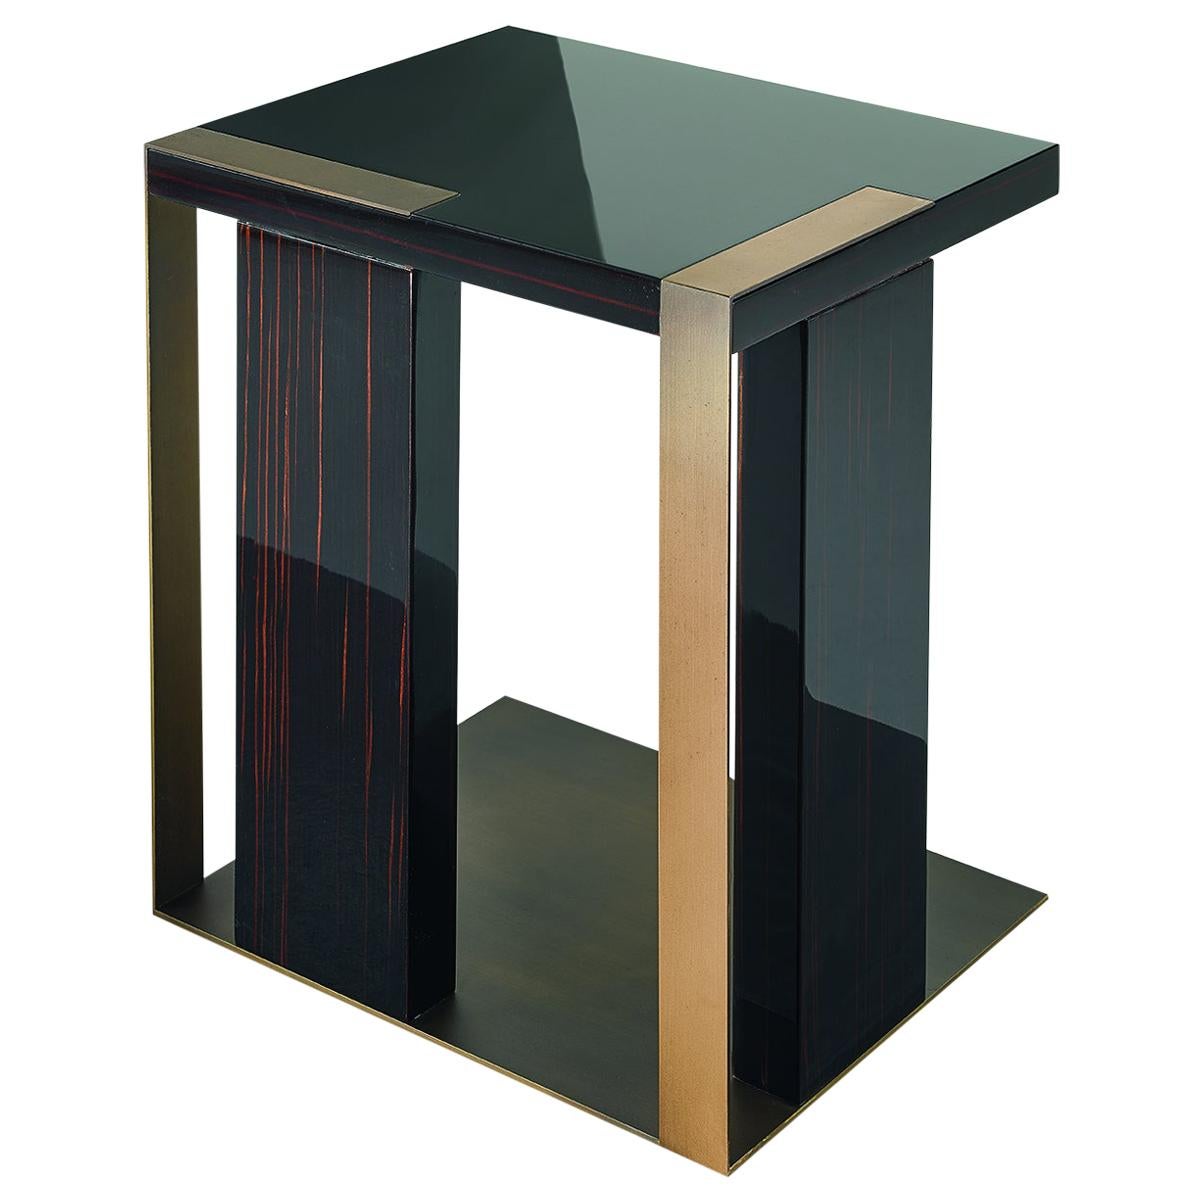 Central or Side Table in Ebony Finish Decorative Insert in Liquid Metal Finish